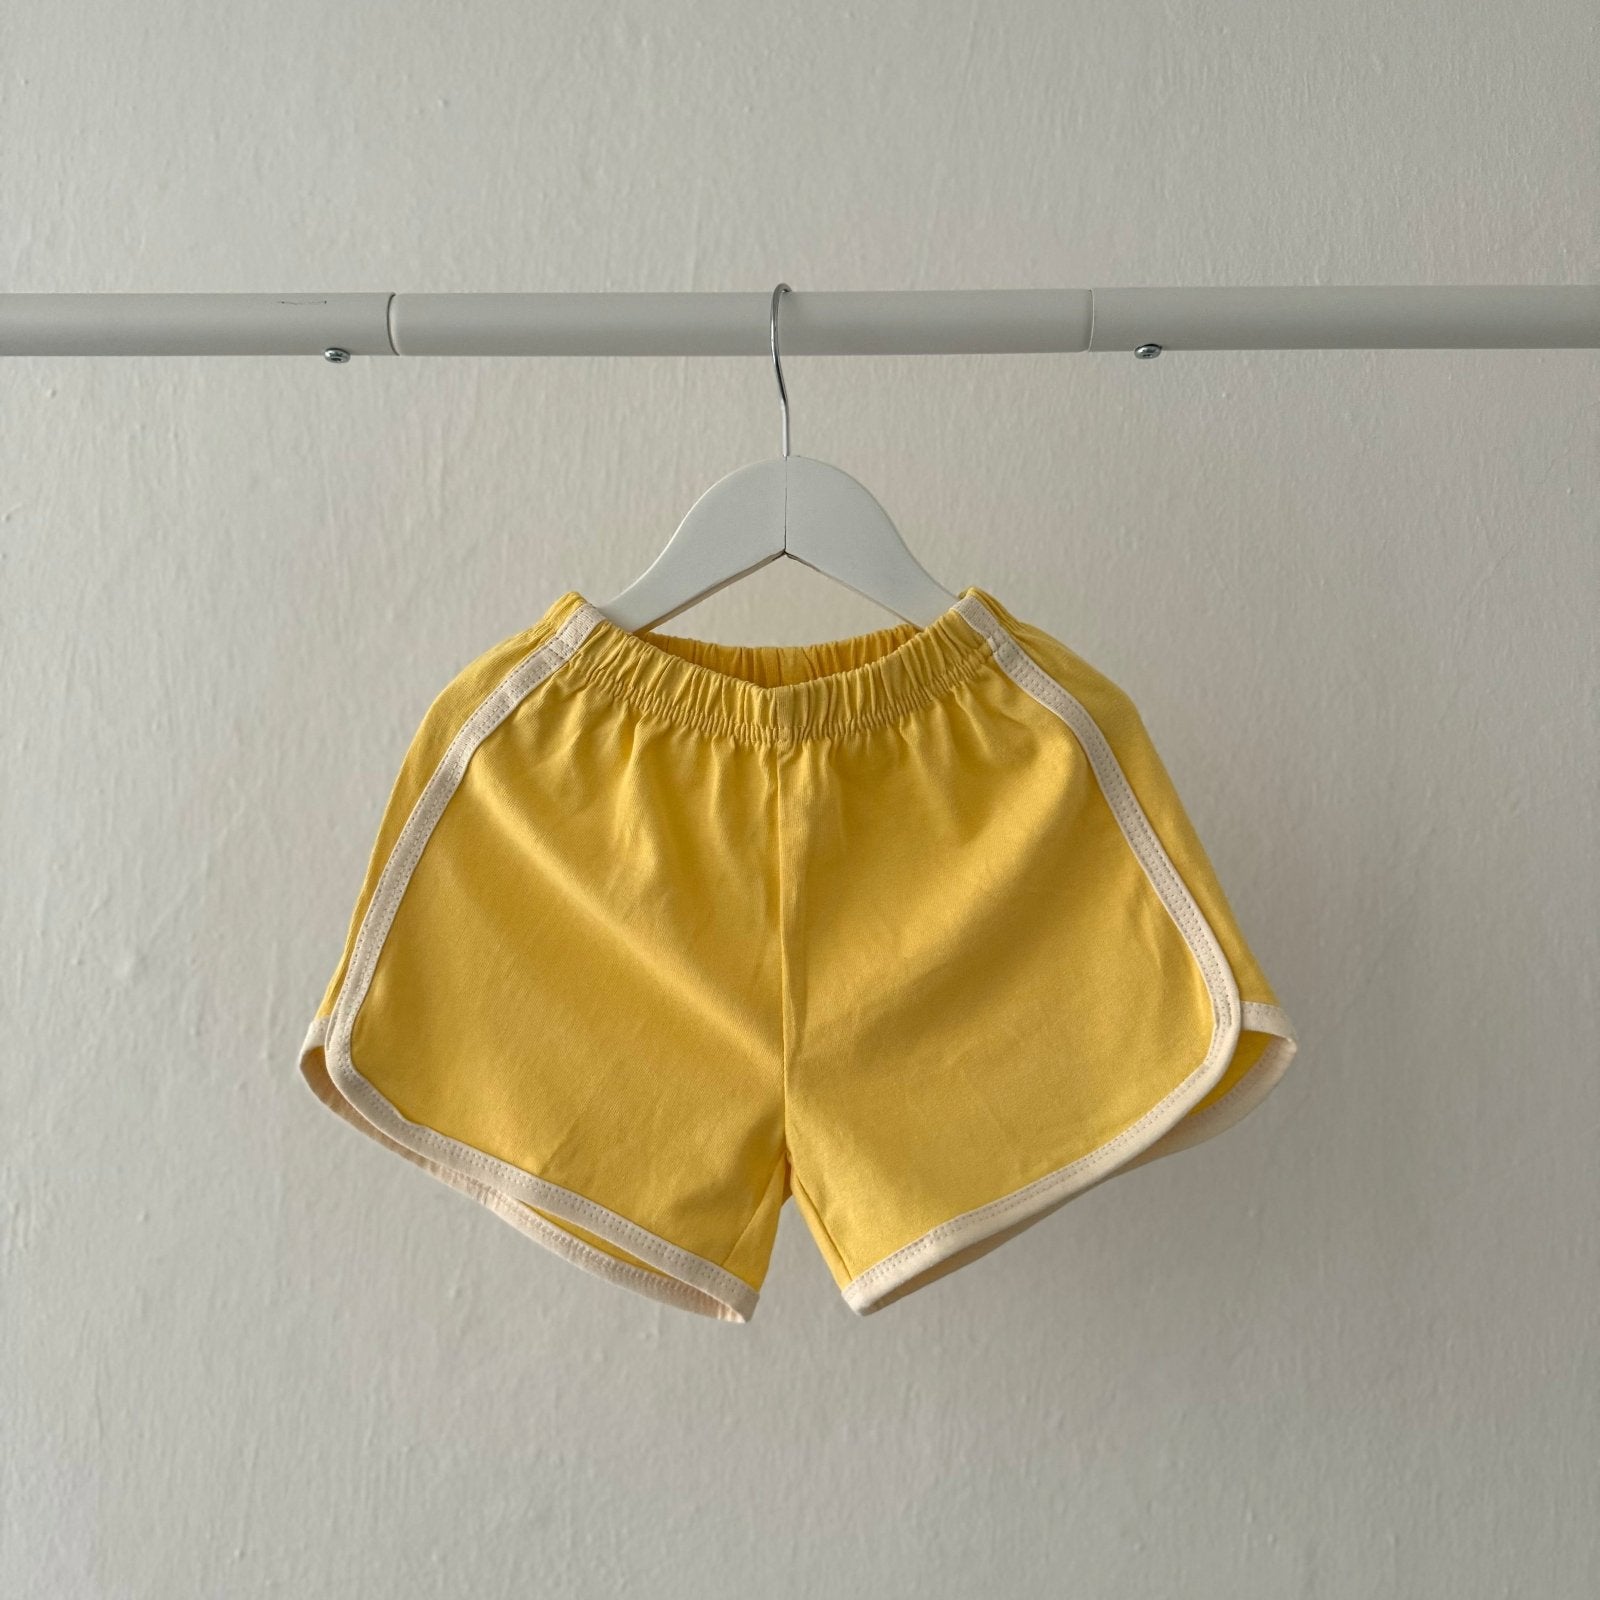 Dolphin Shorts find Stylish Fashion for Little People- at Little Foxx Concept Store